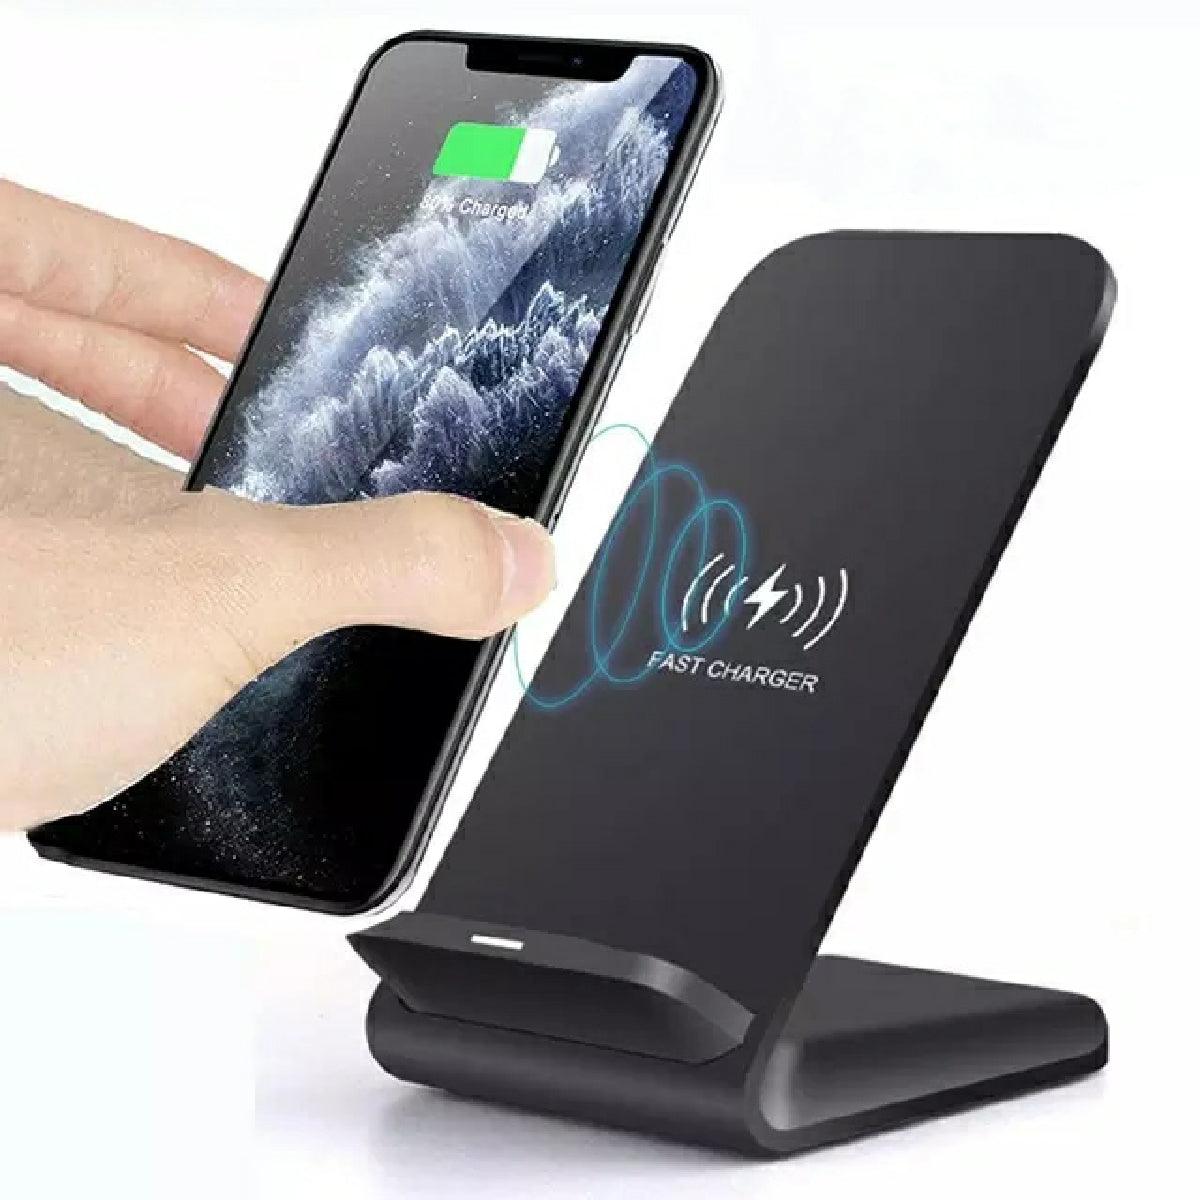 Fast Charging Wireless Charger Pad - Supports Quick Charge - dealskart.com.au